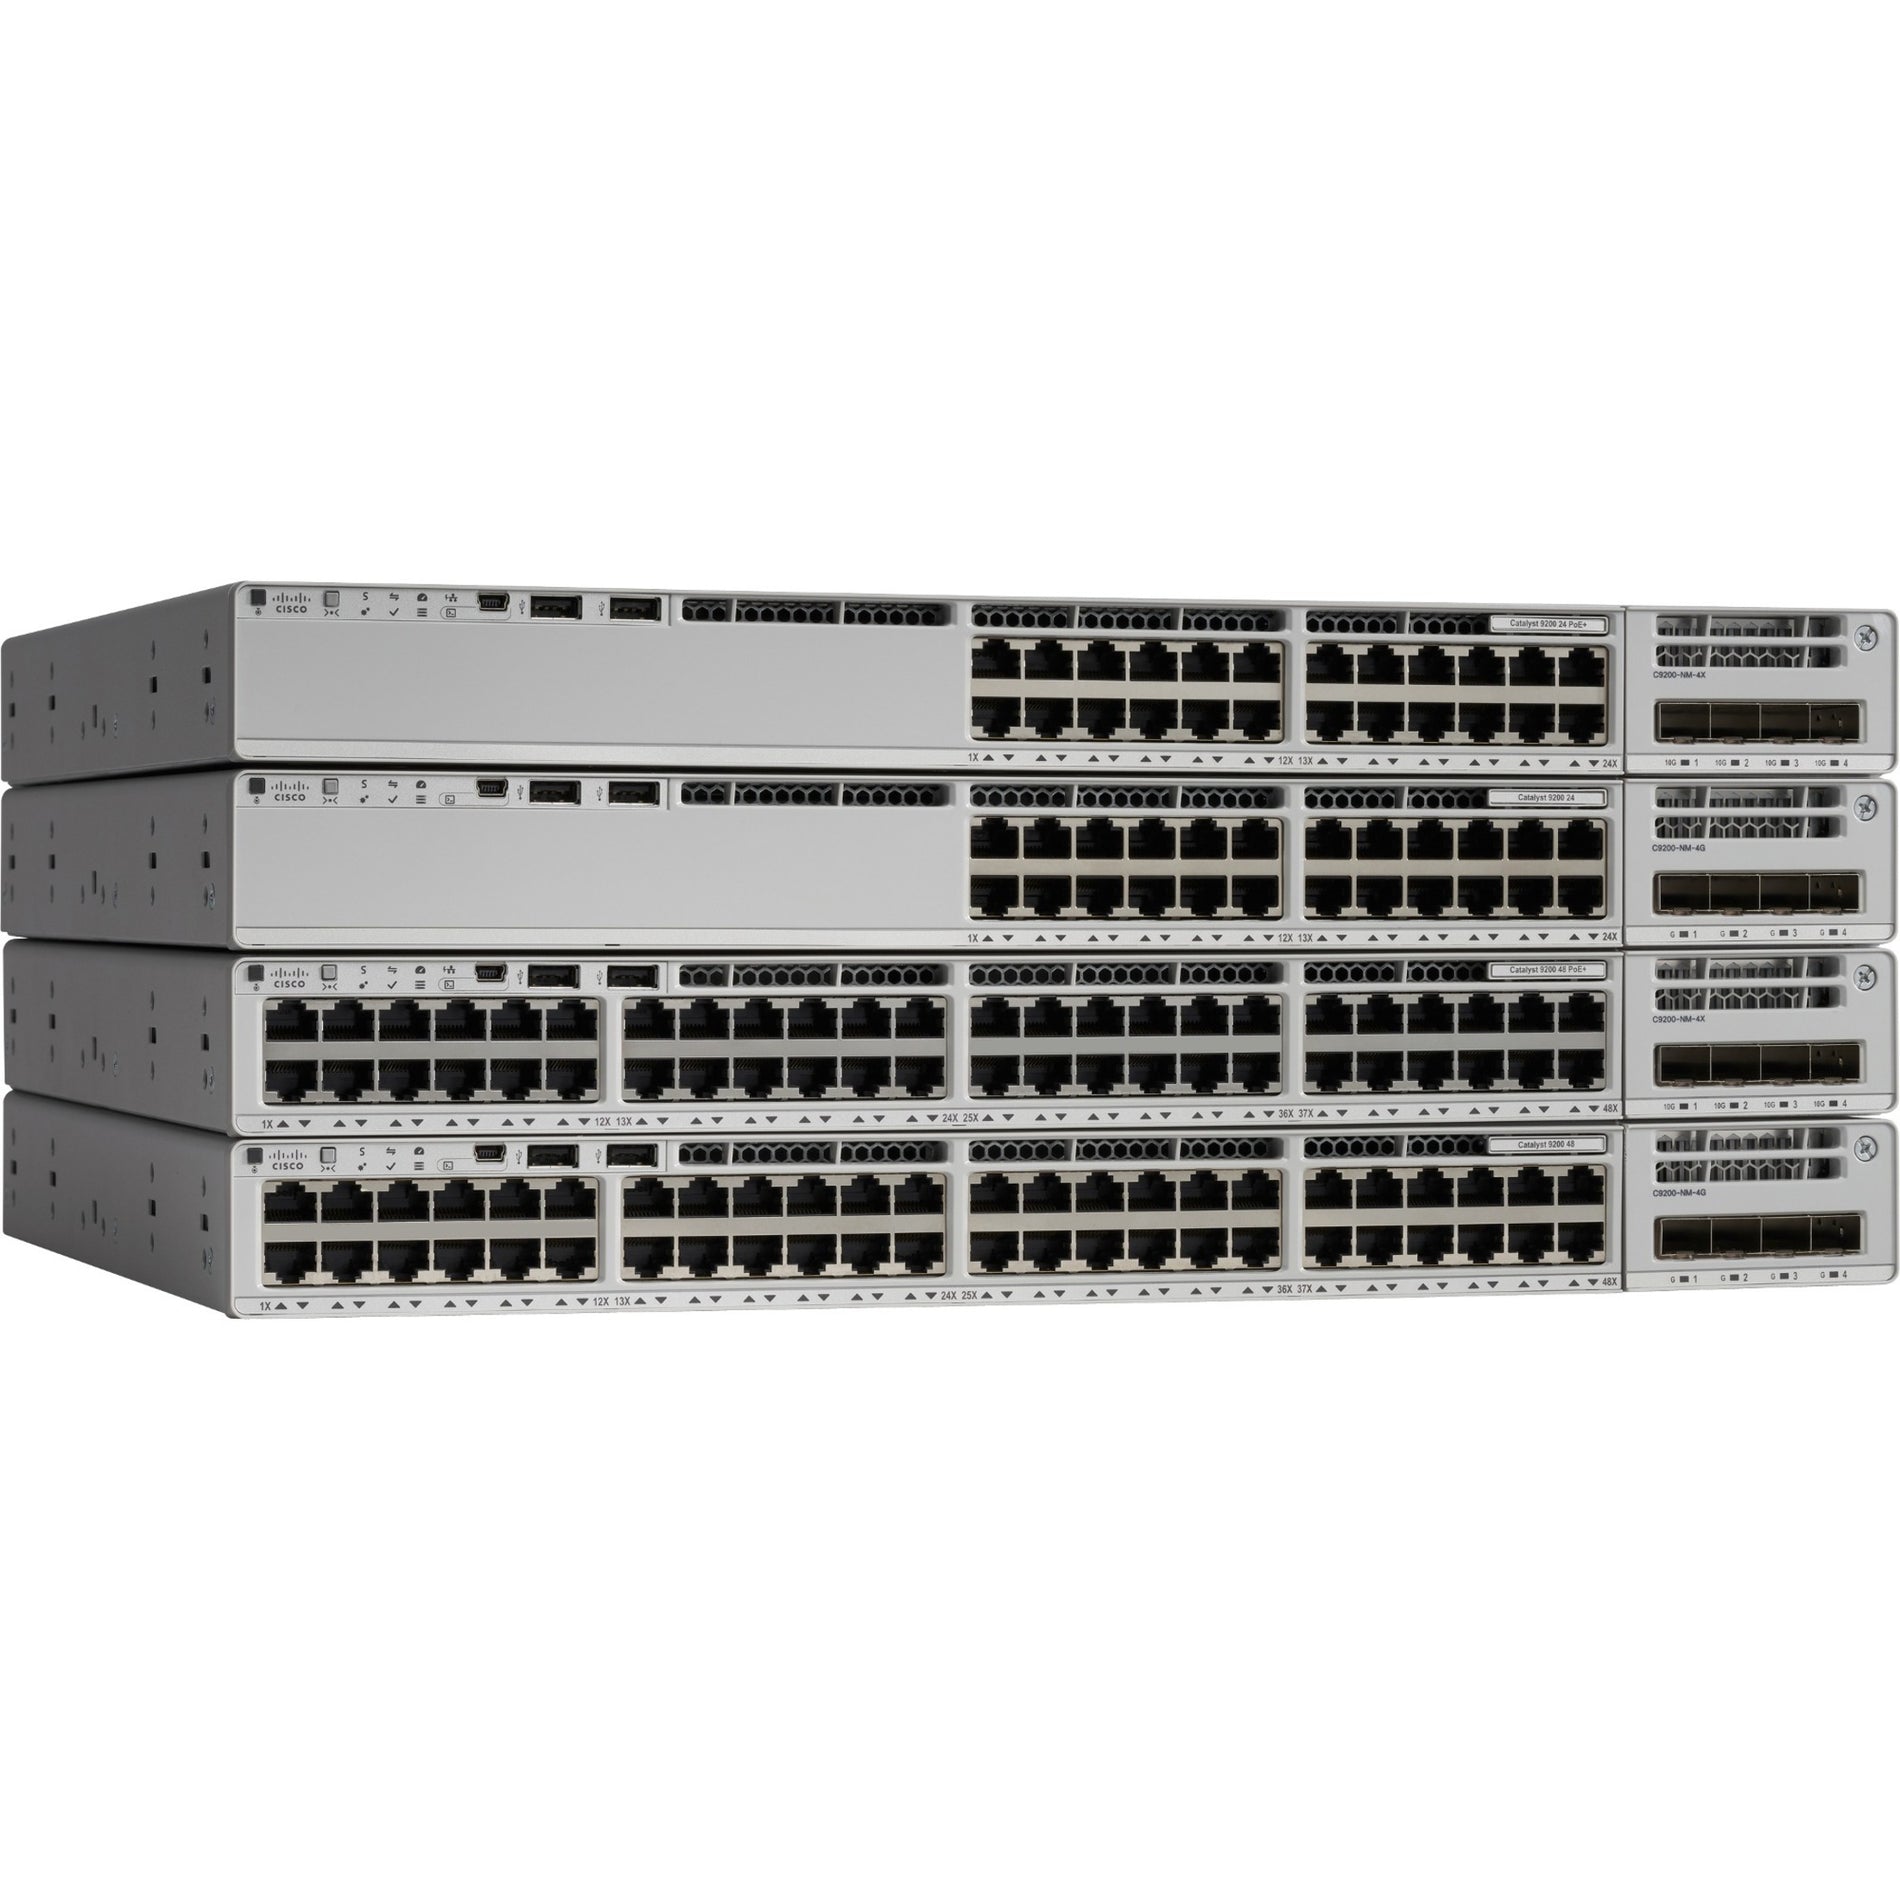 Cisco C9200-48P-A Catalyst C9200-48P Layer 3 Switch, 48 Gigabit Ethernet Ports, Power Supply Supported